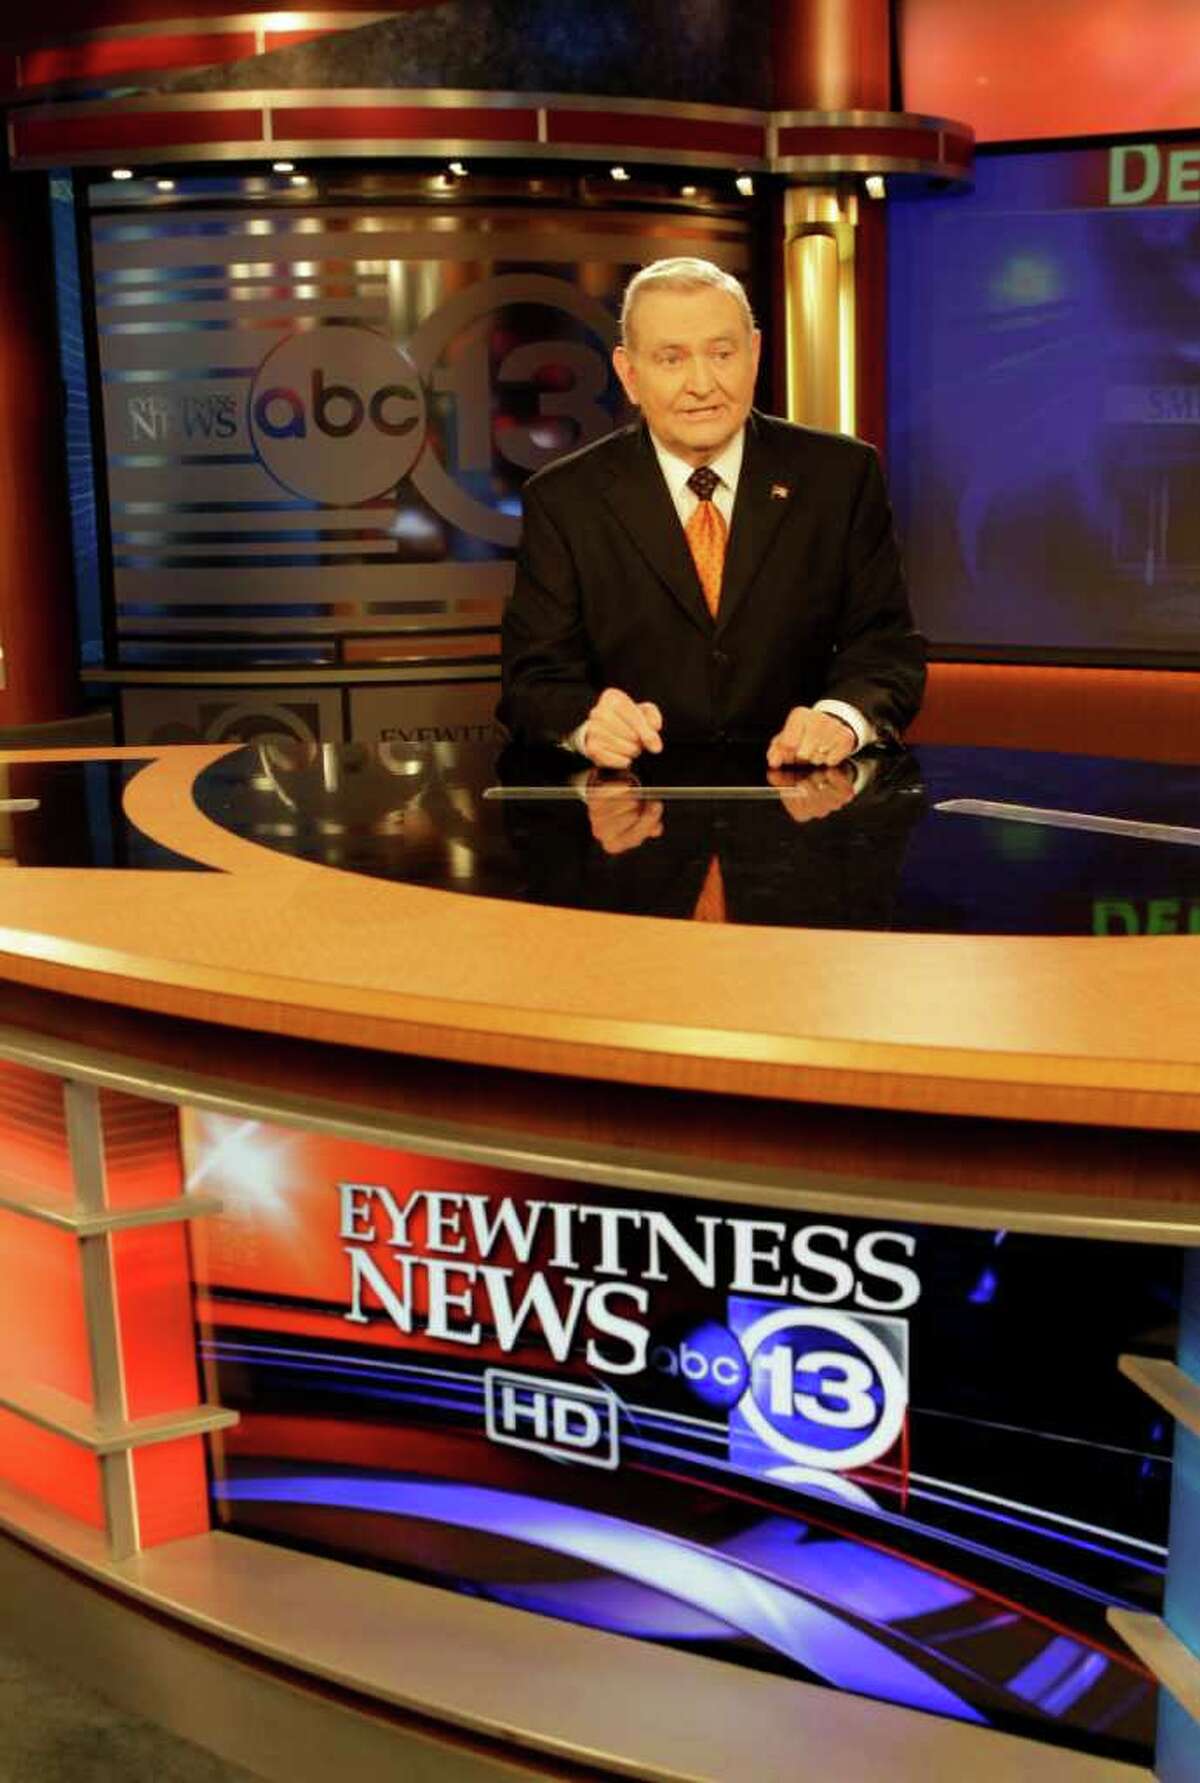 Channel 13 anchor aims for 50 years at station